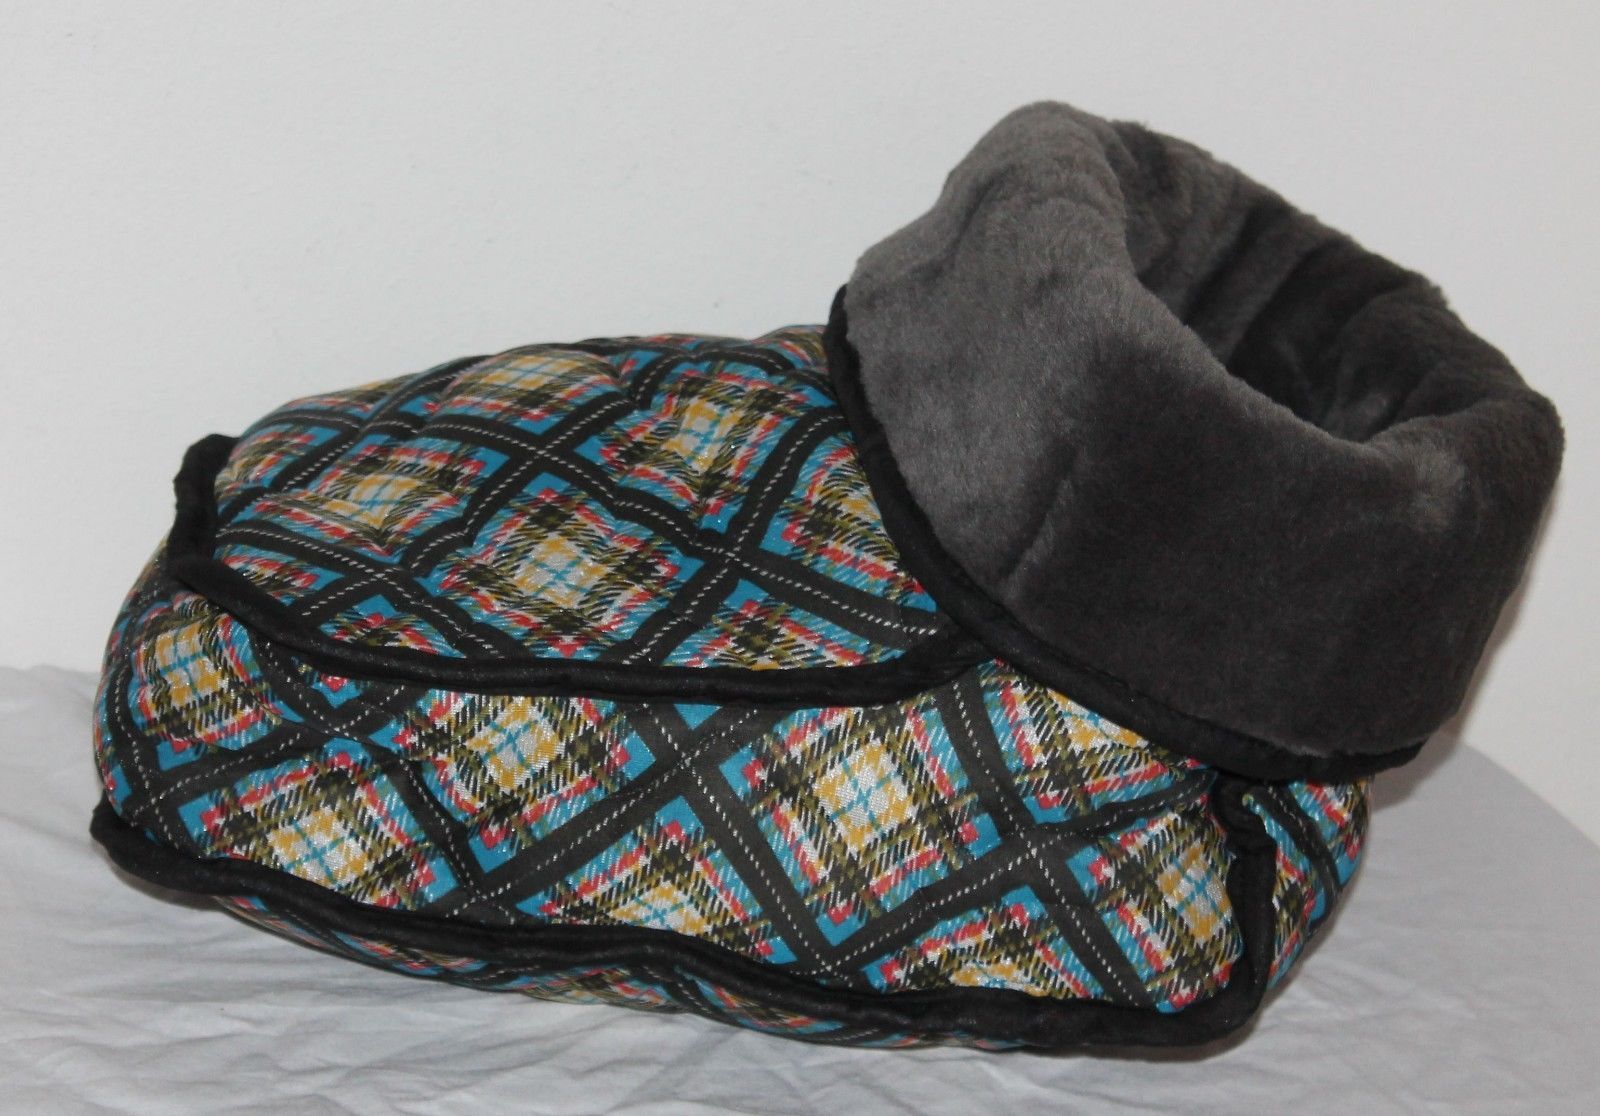 Foot Sack Quilted Warmer Two-Footed Slipper Muff Plaid VTG 60s Stadium ...